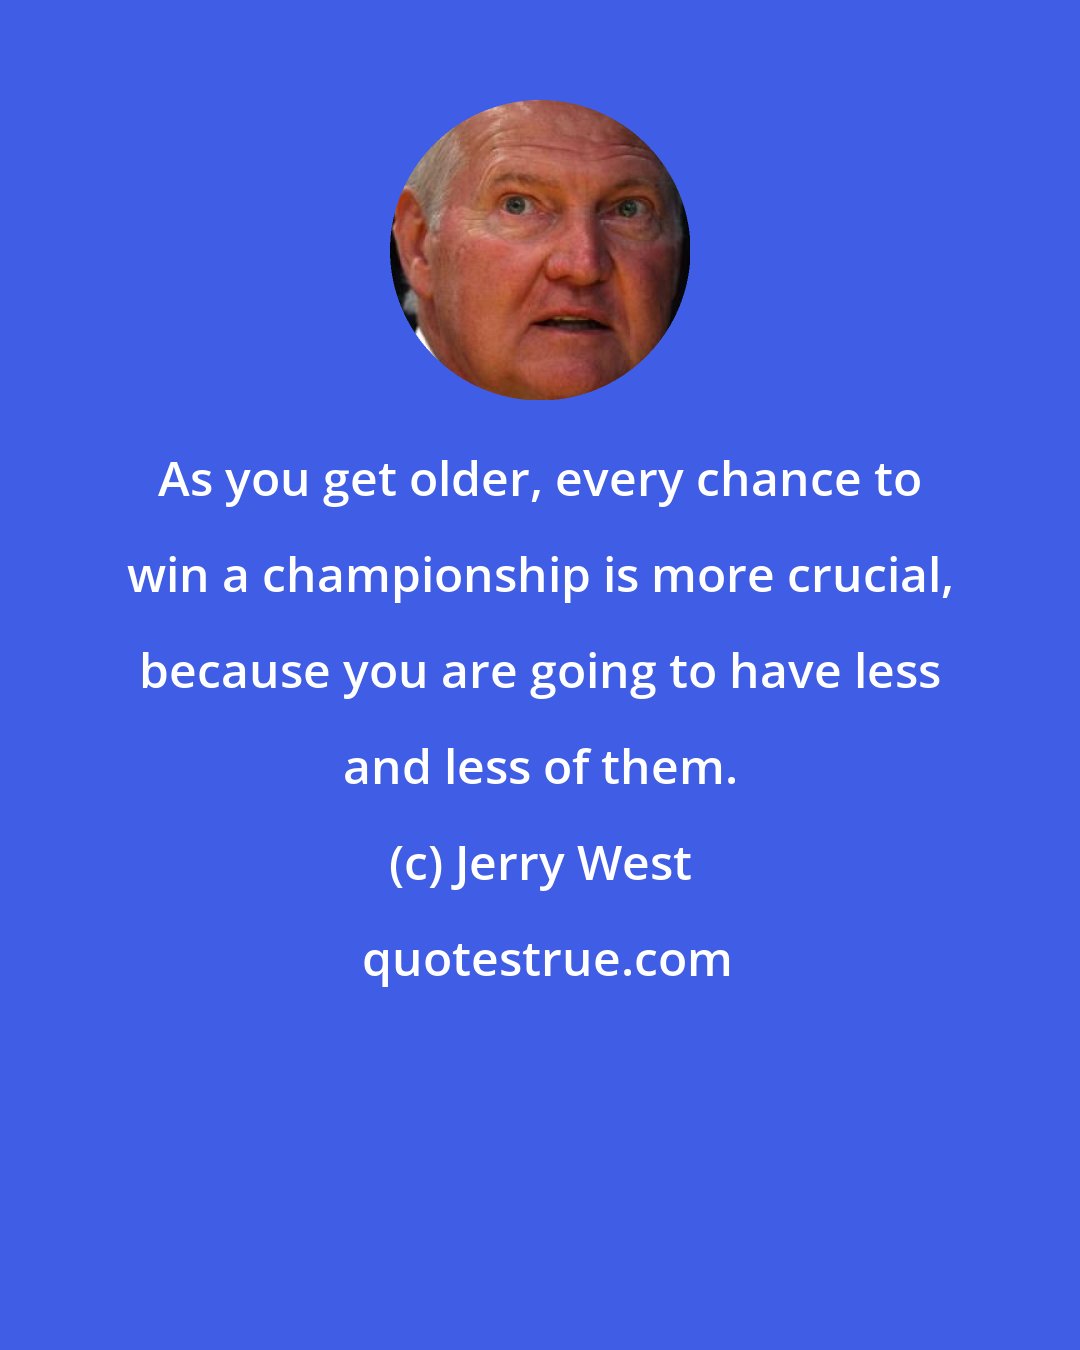 Jerry West: As you get older, every chance to win a championship is more crucial, because you are going to have less and less of them.